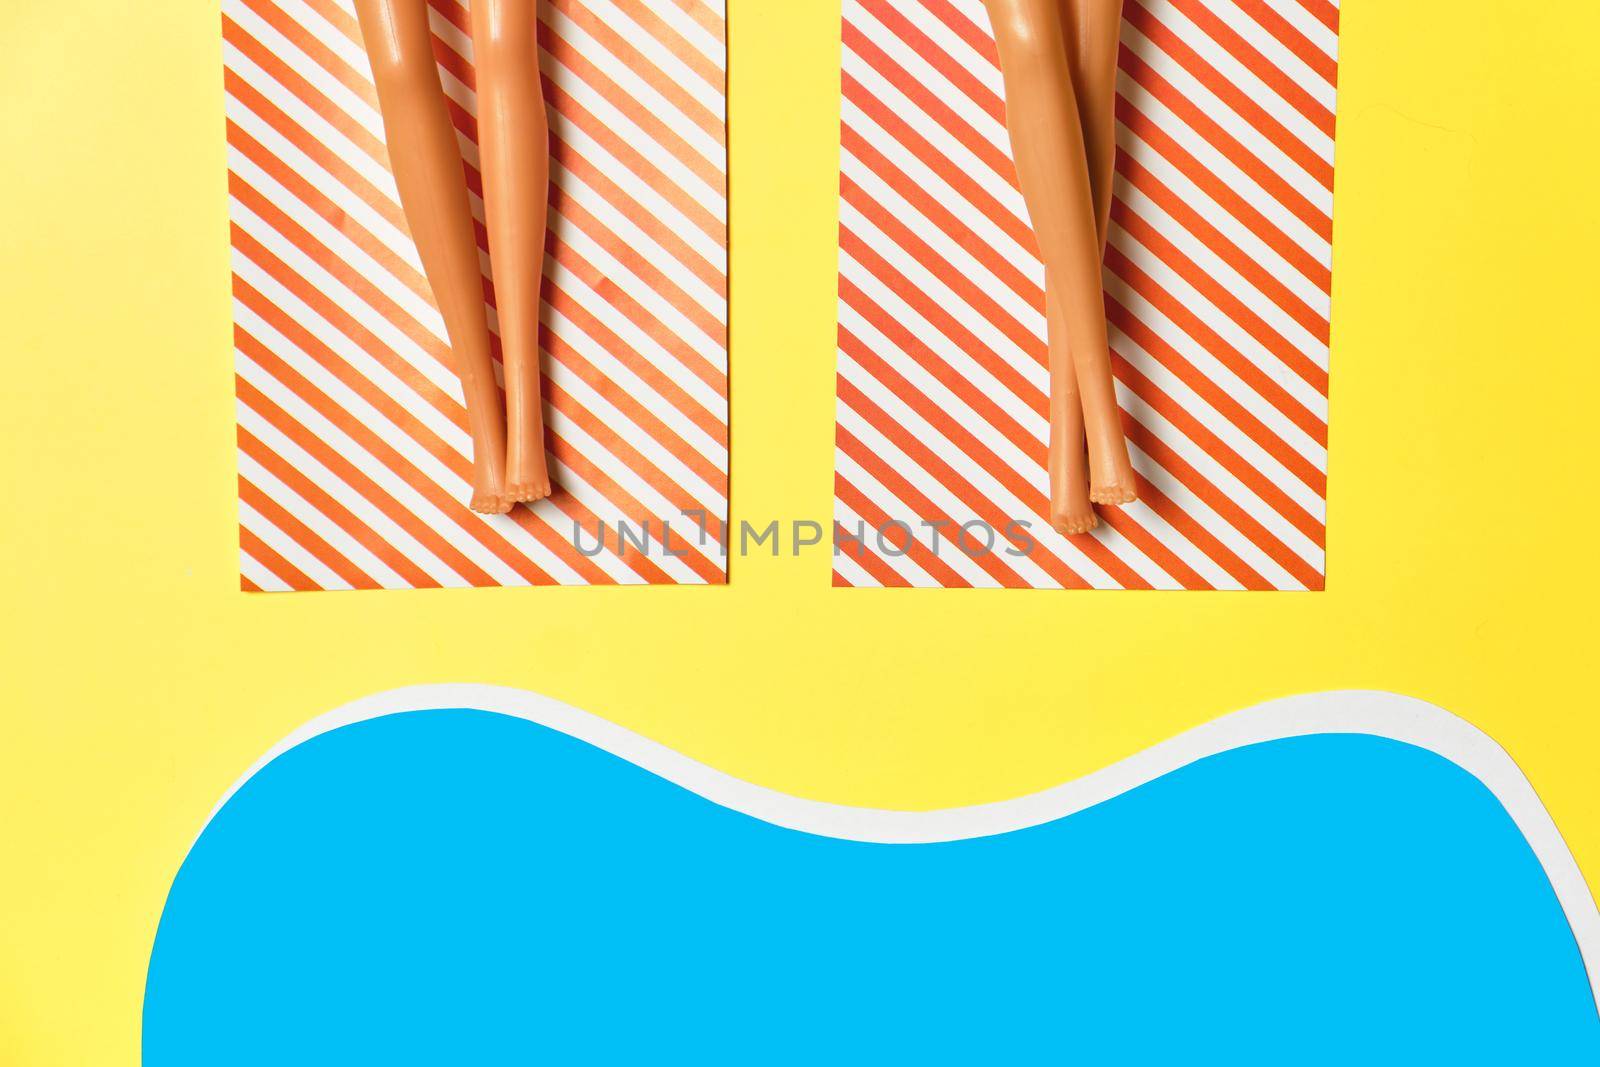 Summer vacation layout with doll legs on beach towels, flat pool, beach, yellow background. by InnaVlasova